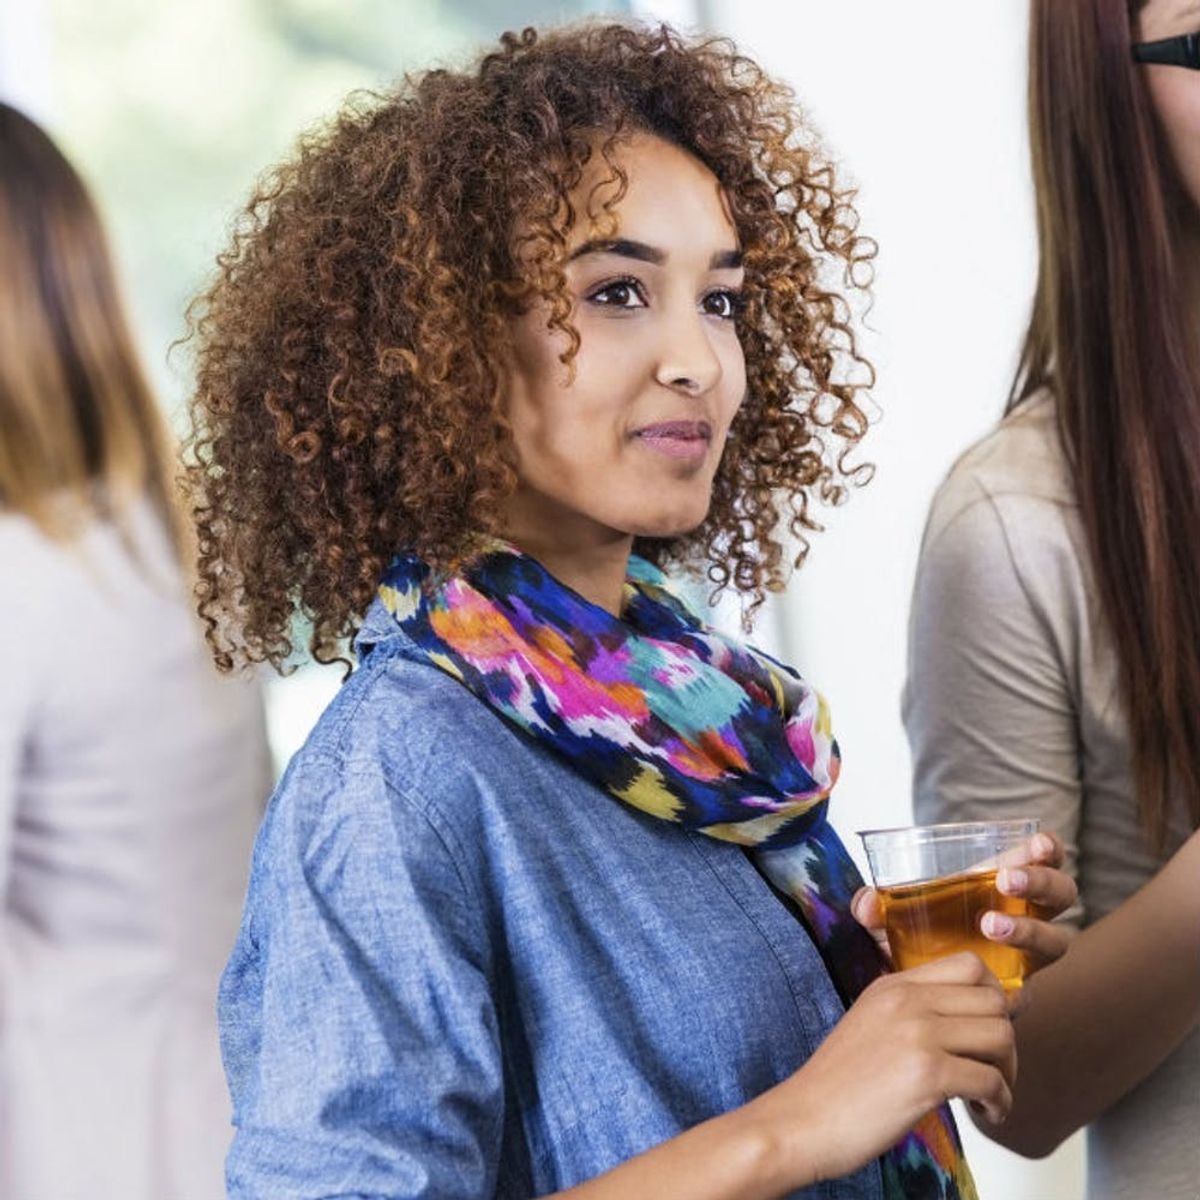 6 Brilliant Networking Hacks Every Introvert Should Know